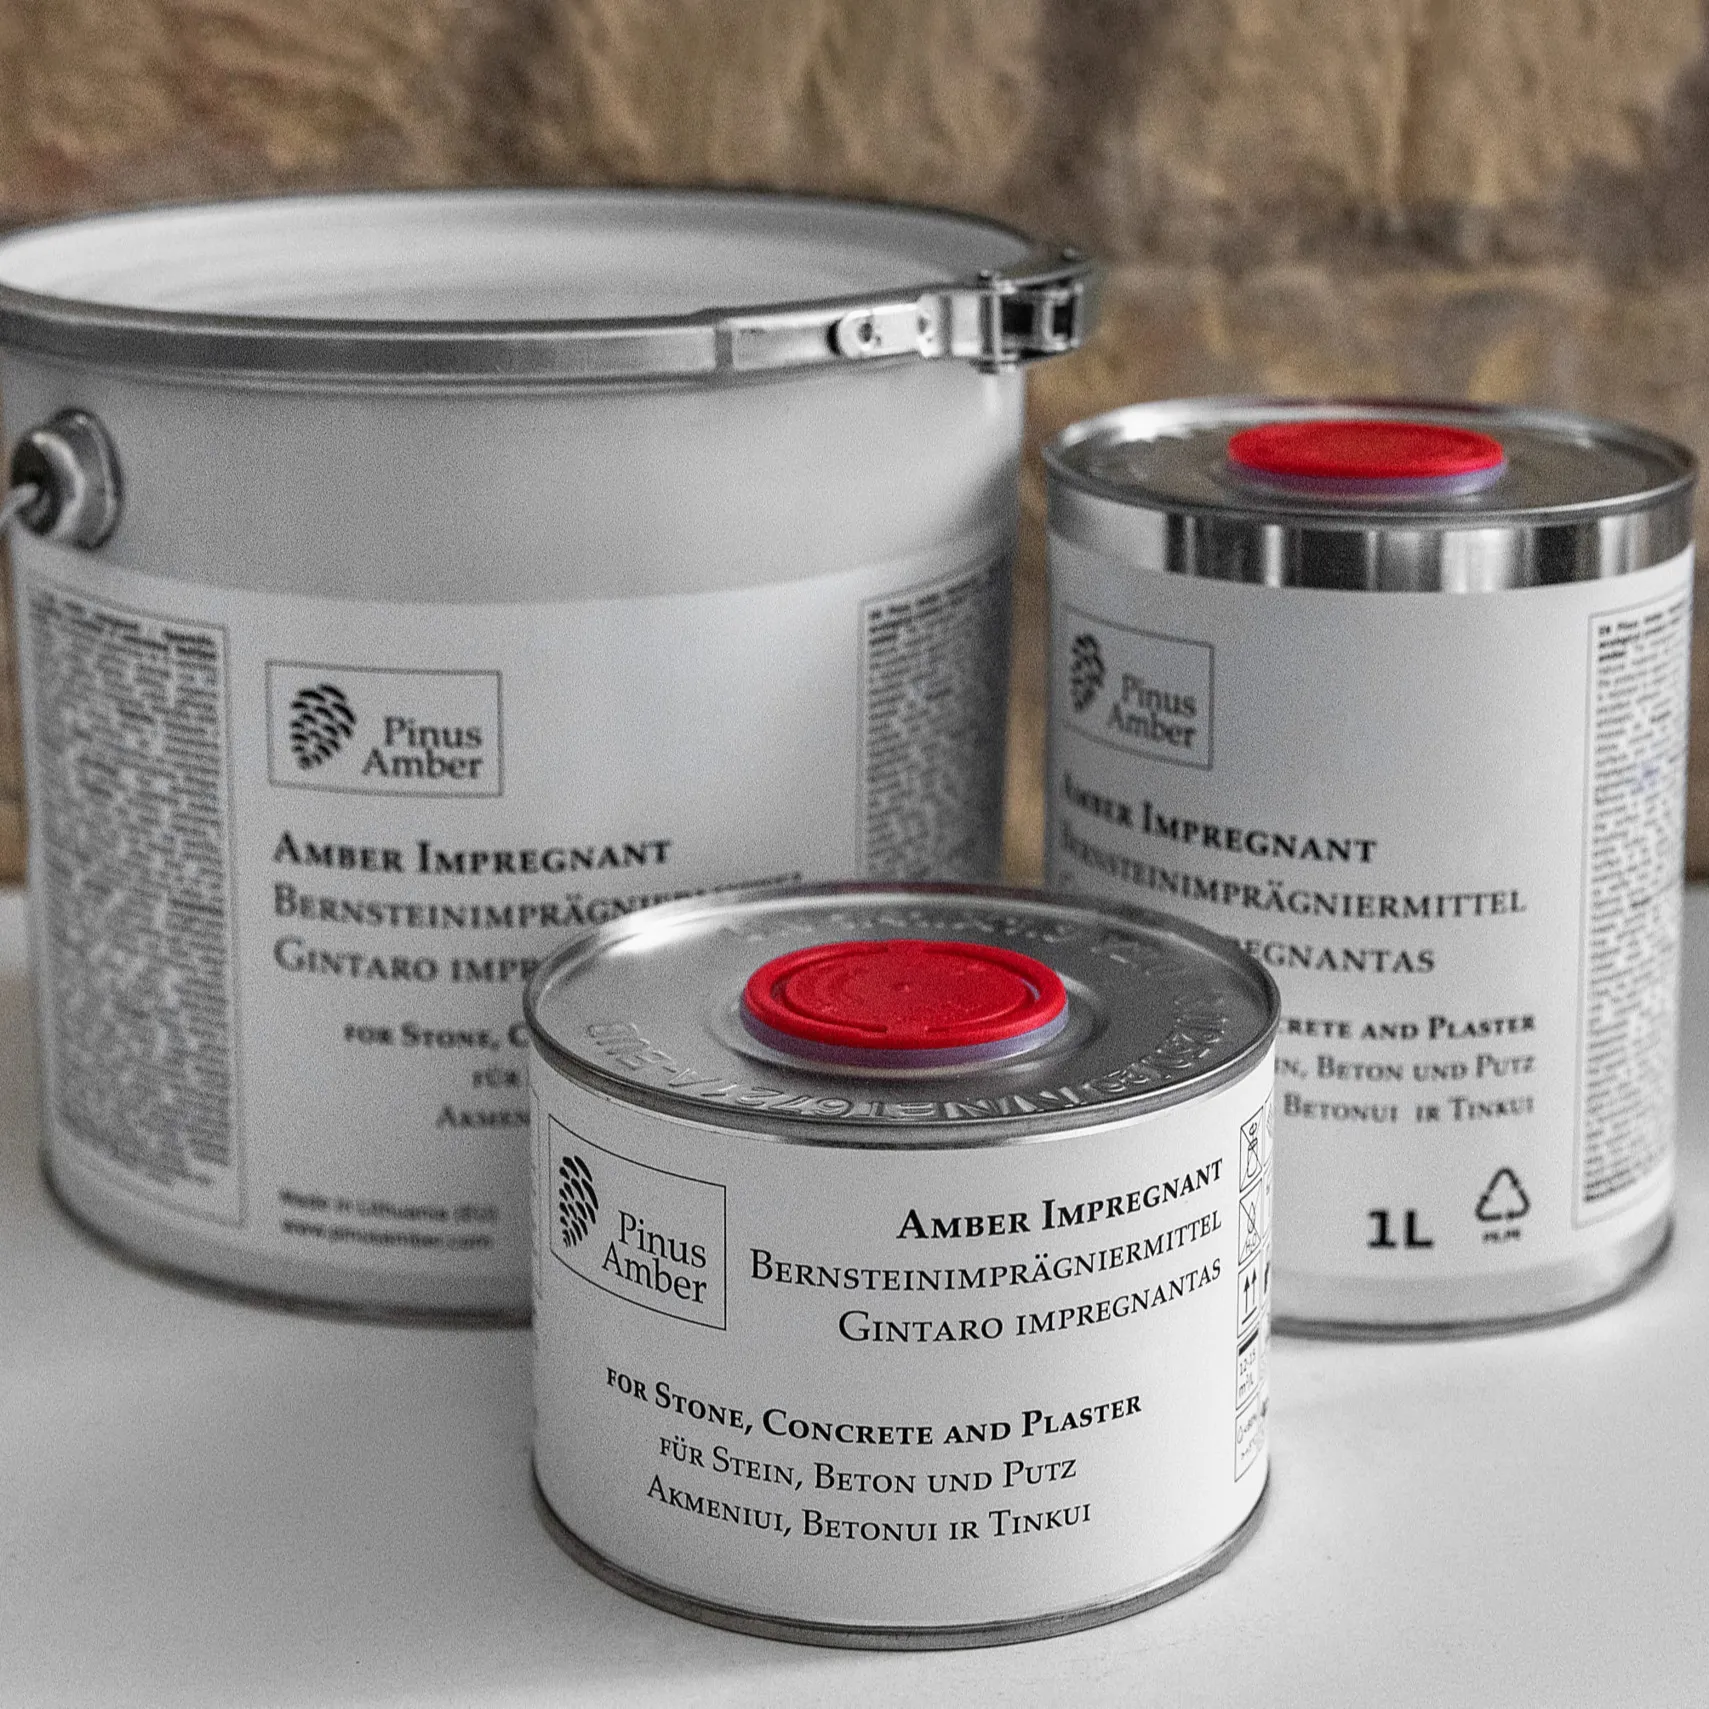 Impregnator for plaster and concrete ecological impregnator made only from natural components, premium long lasting